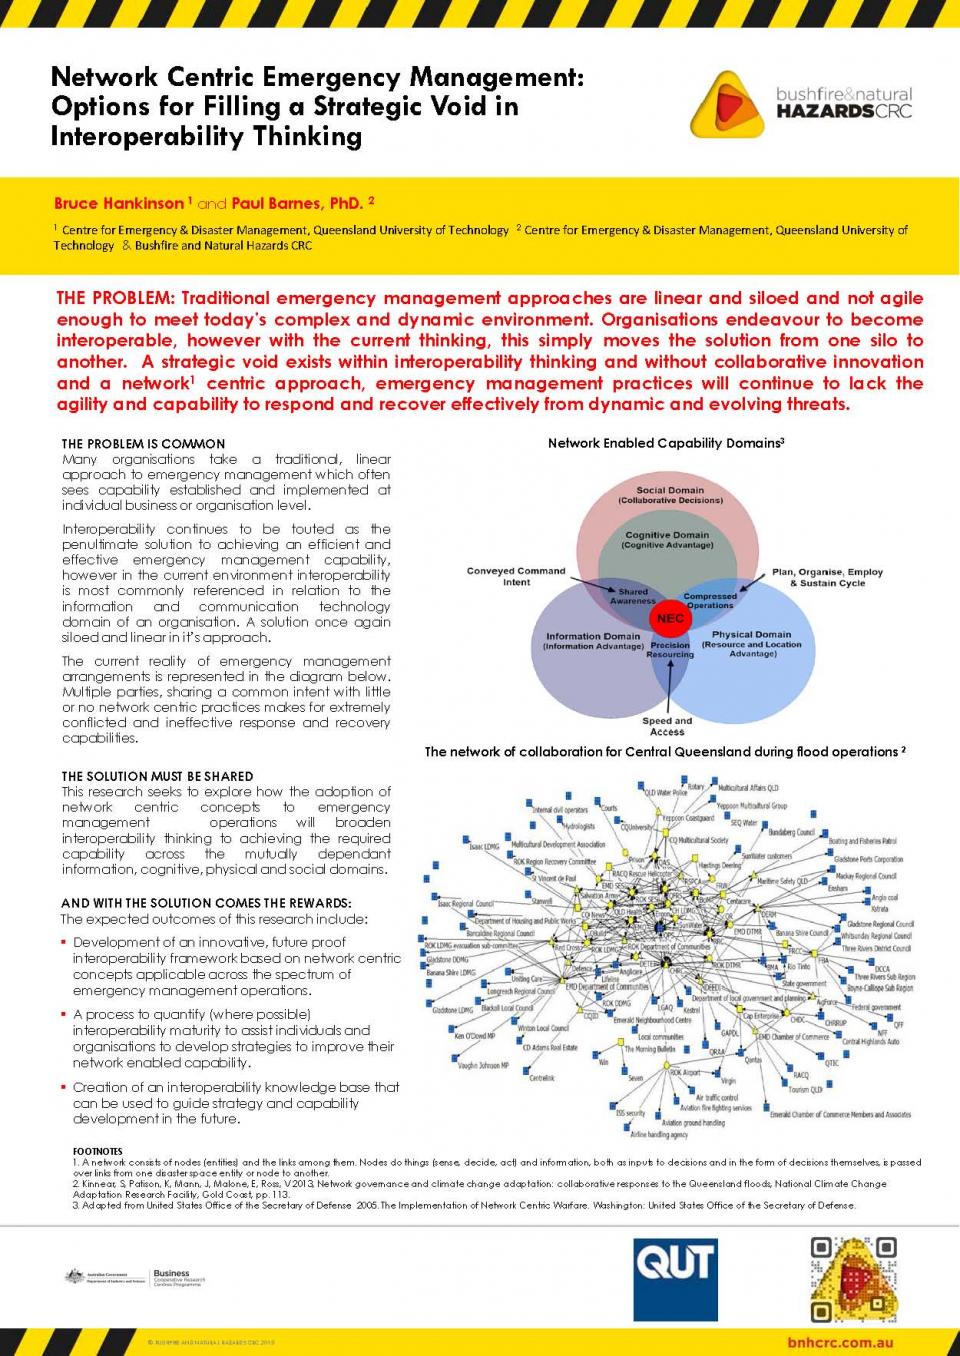 Network Centric Emergency Management: Options for Filling a Strategic Void in Interoperability Thinking